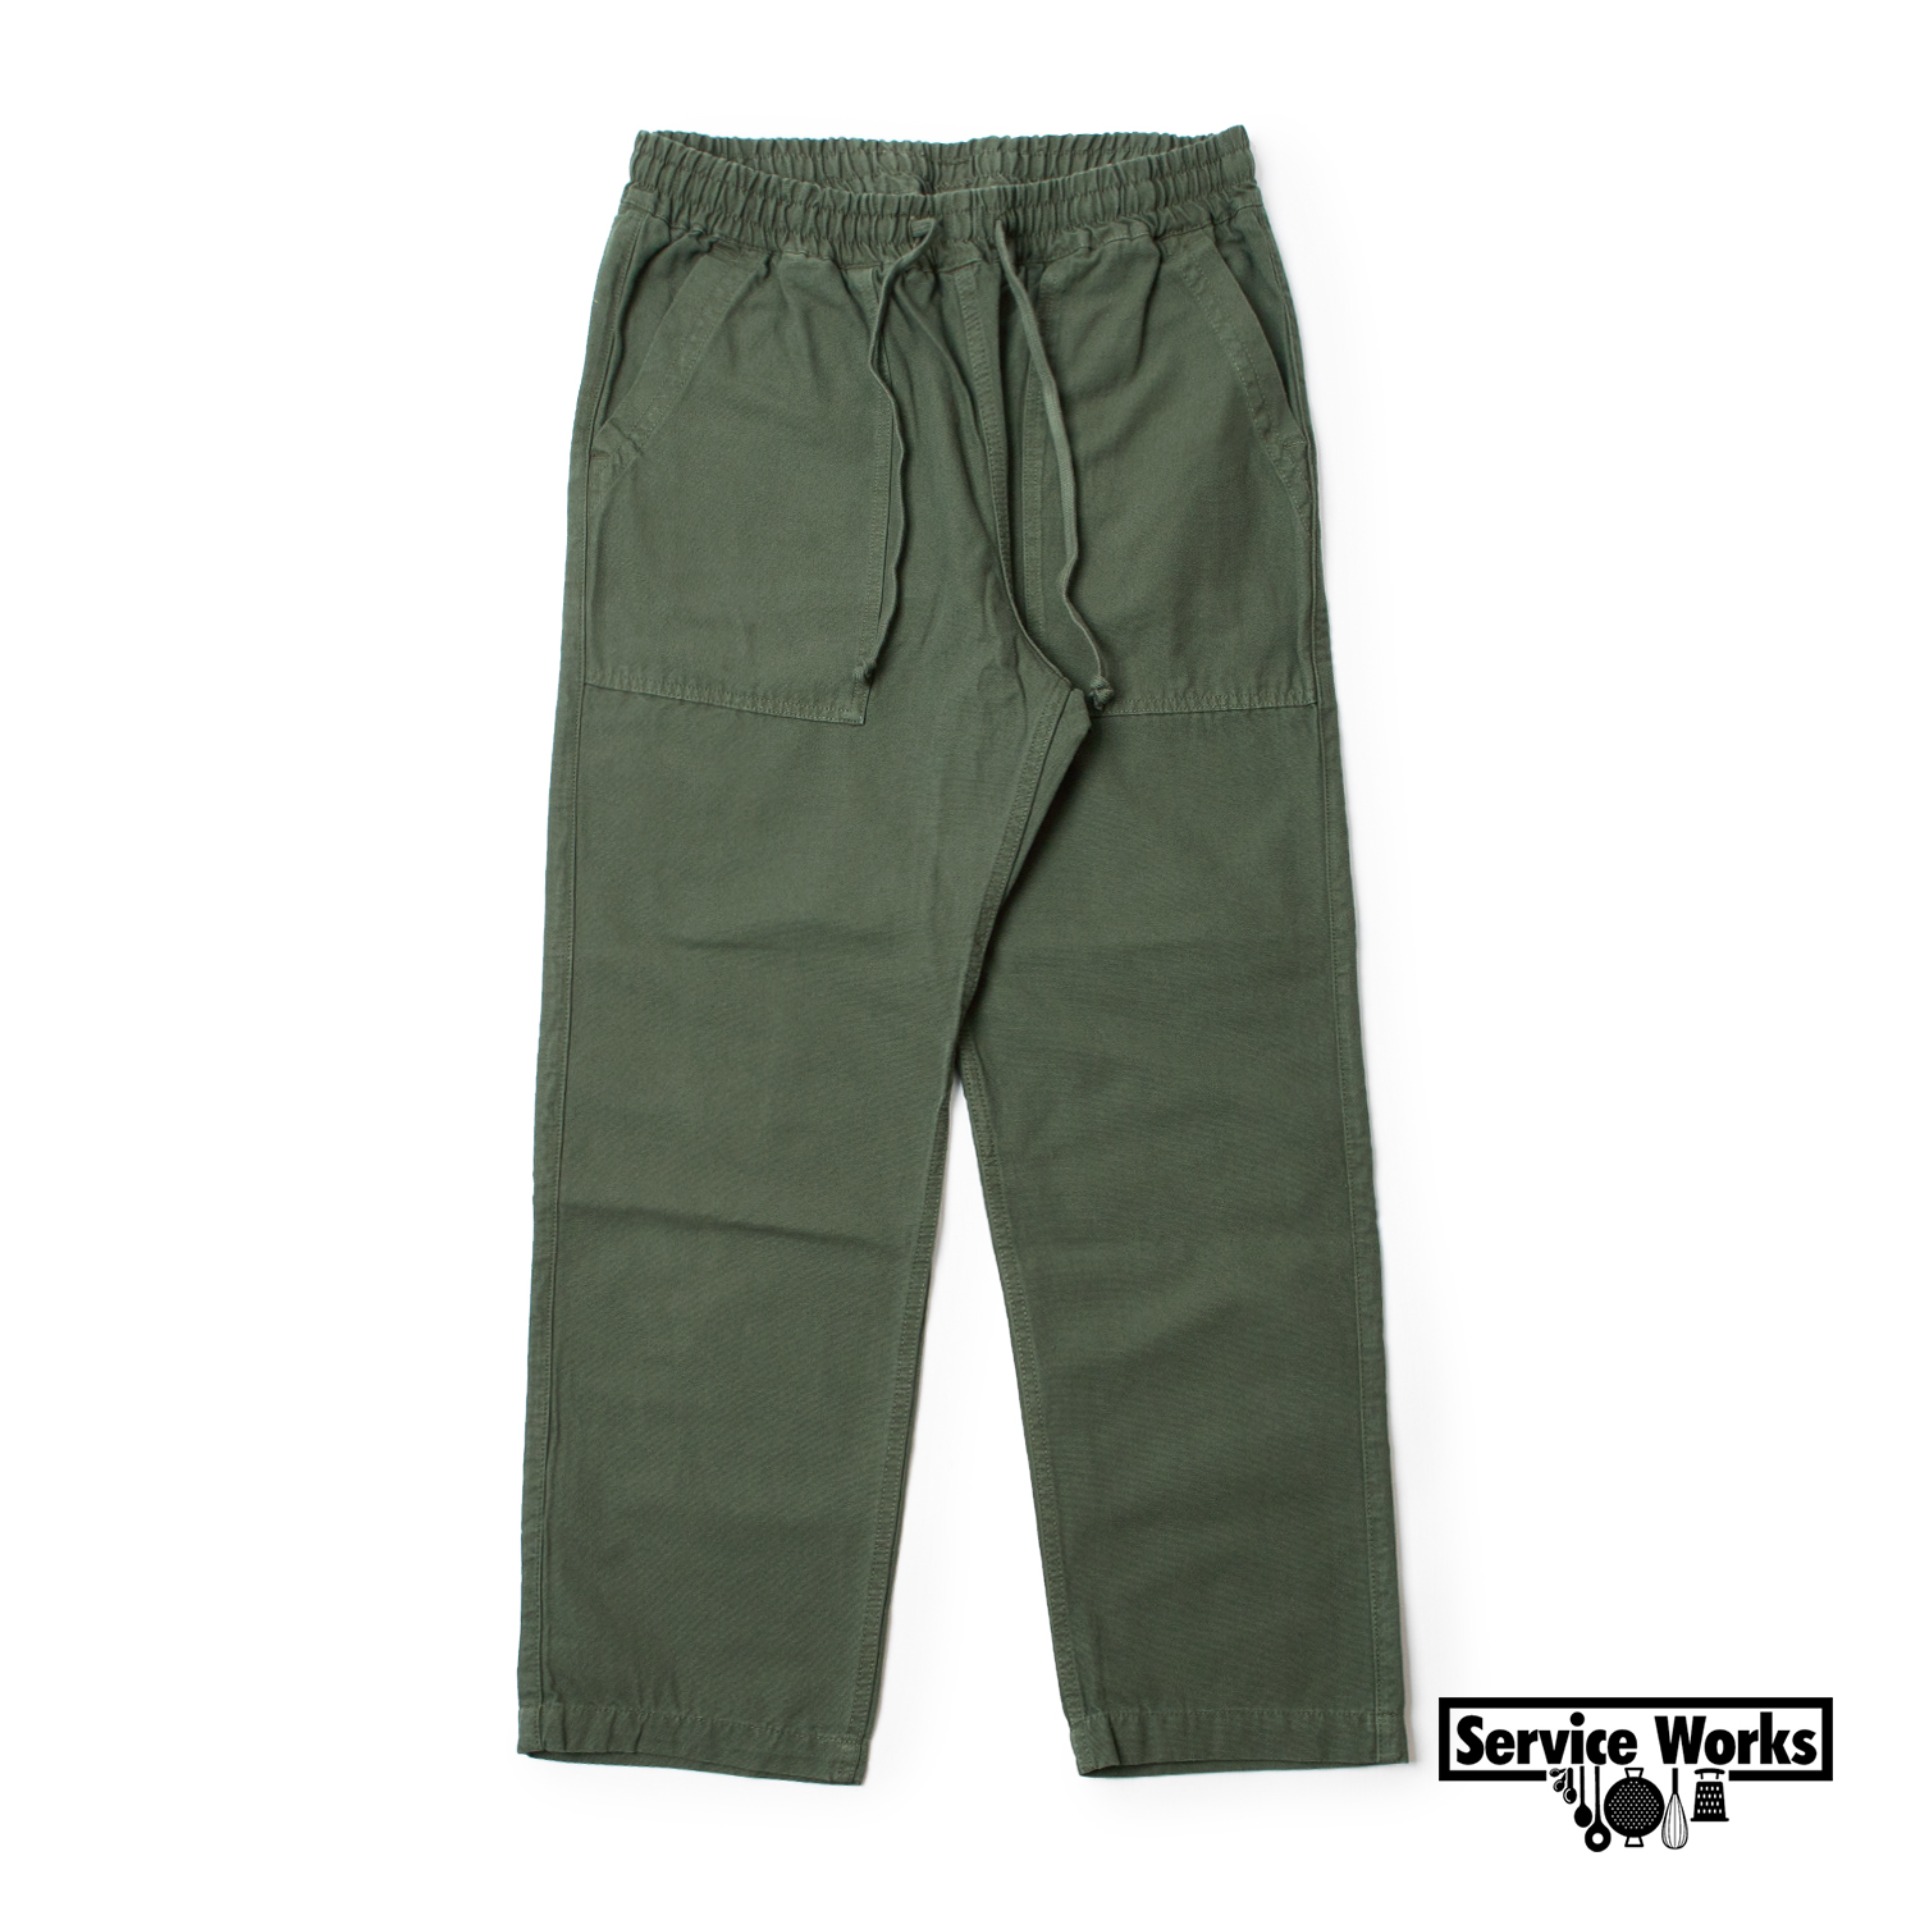  TRADE CHEF PANTS  (Olive)